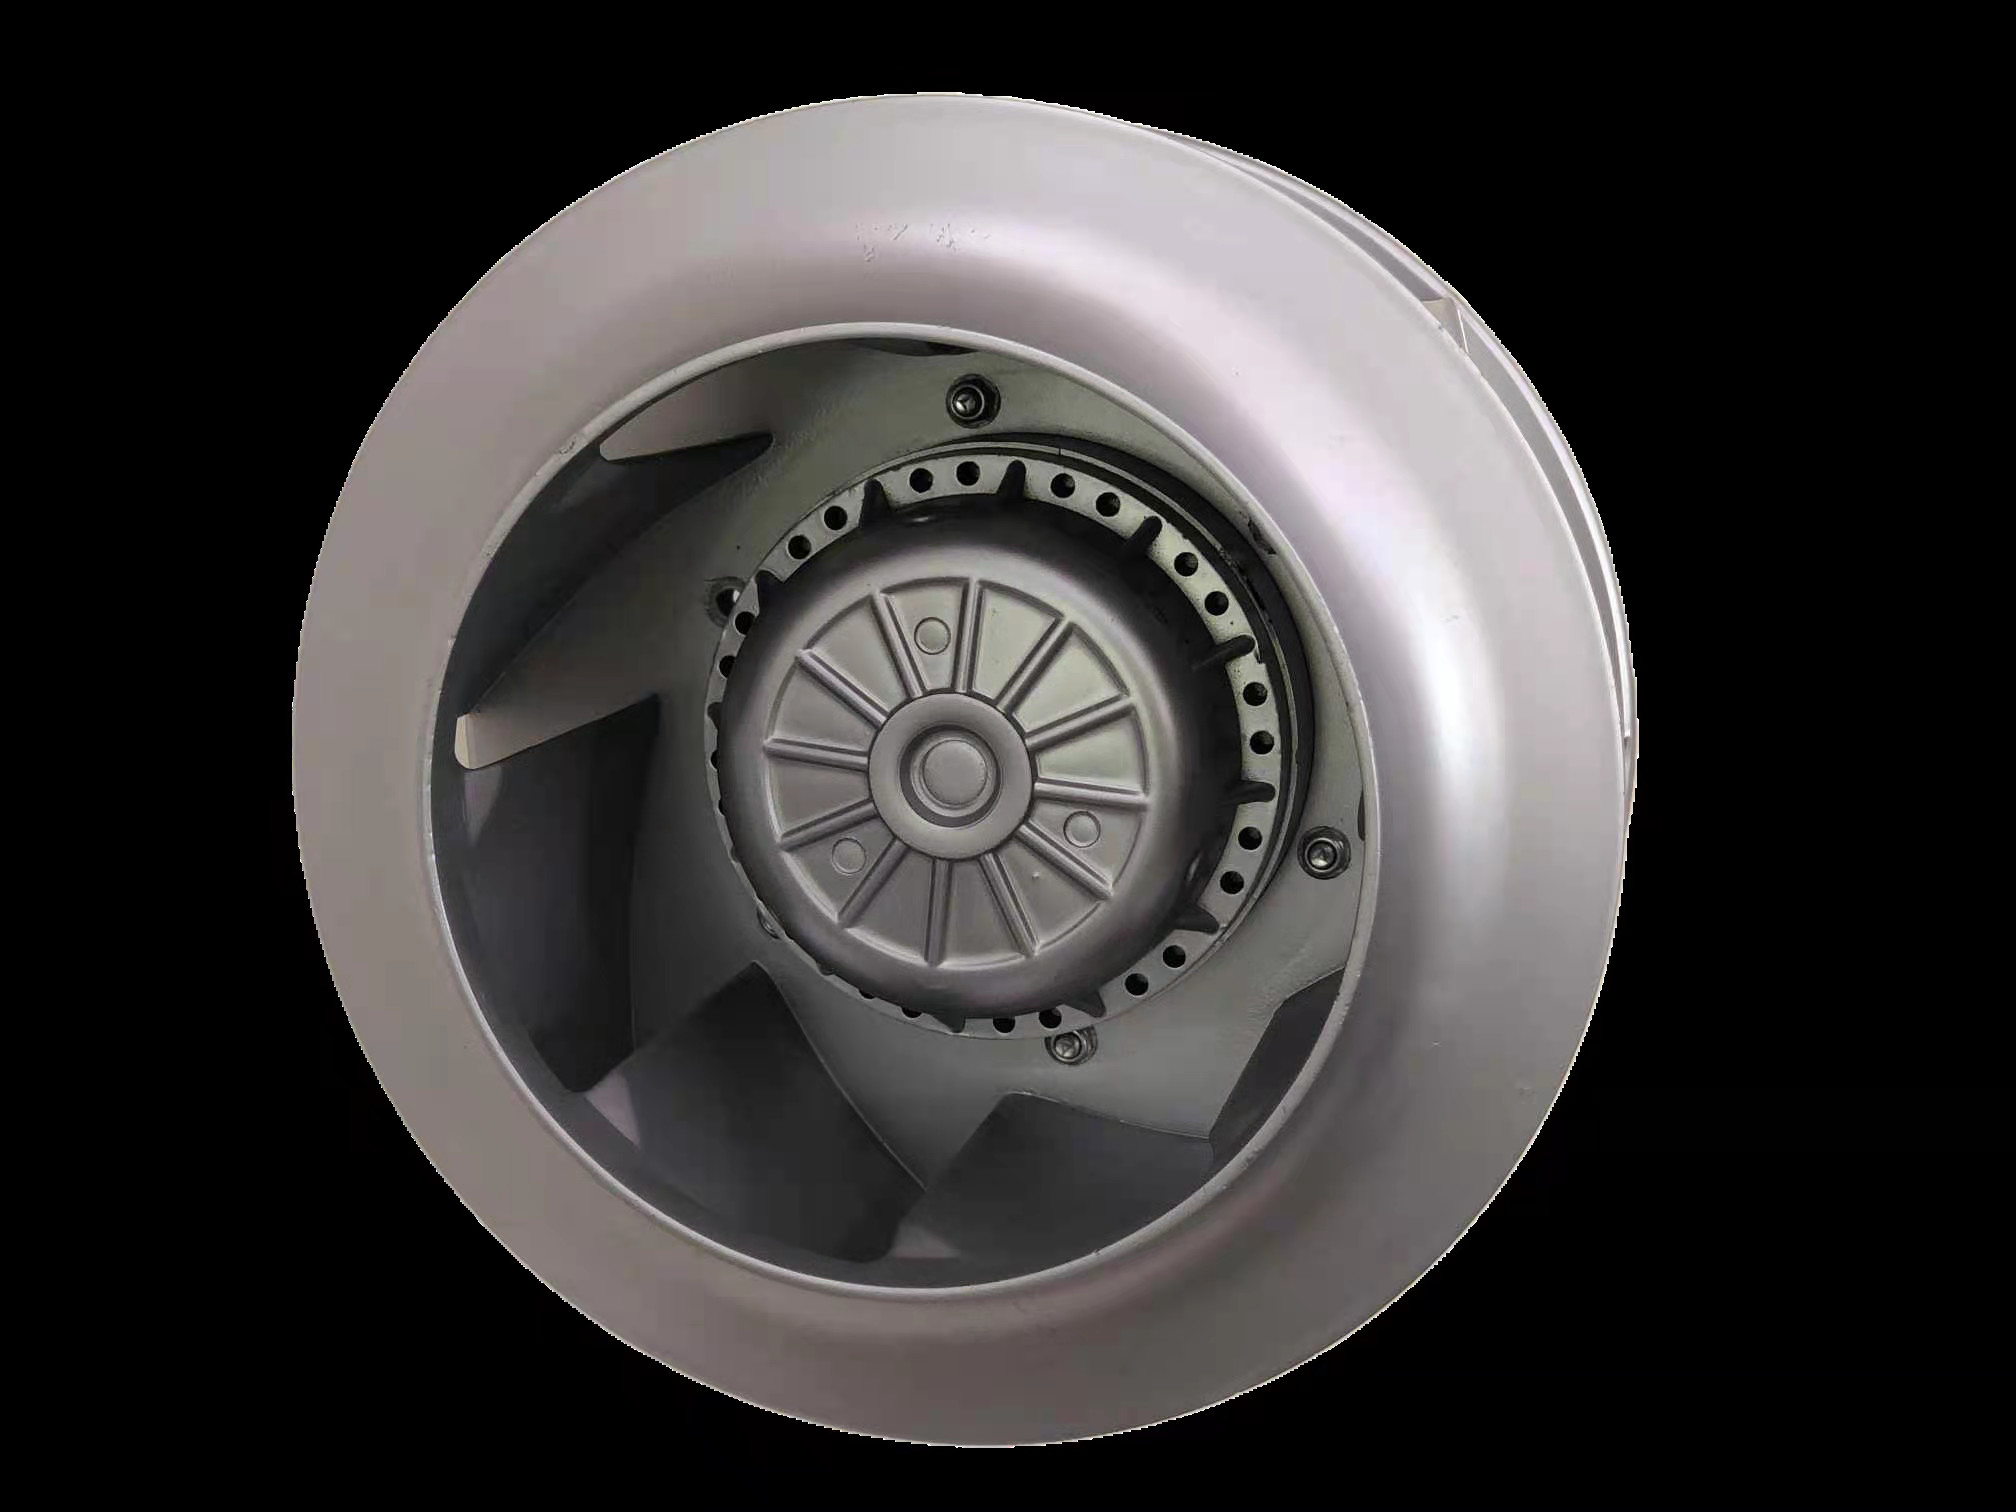  A Large Air Flow AC Centrifugal Fan 180mm Backward Curved Blade Manufactures